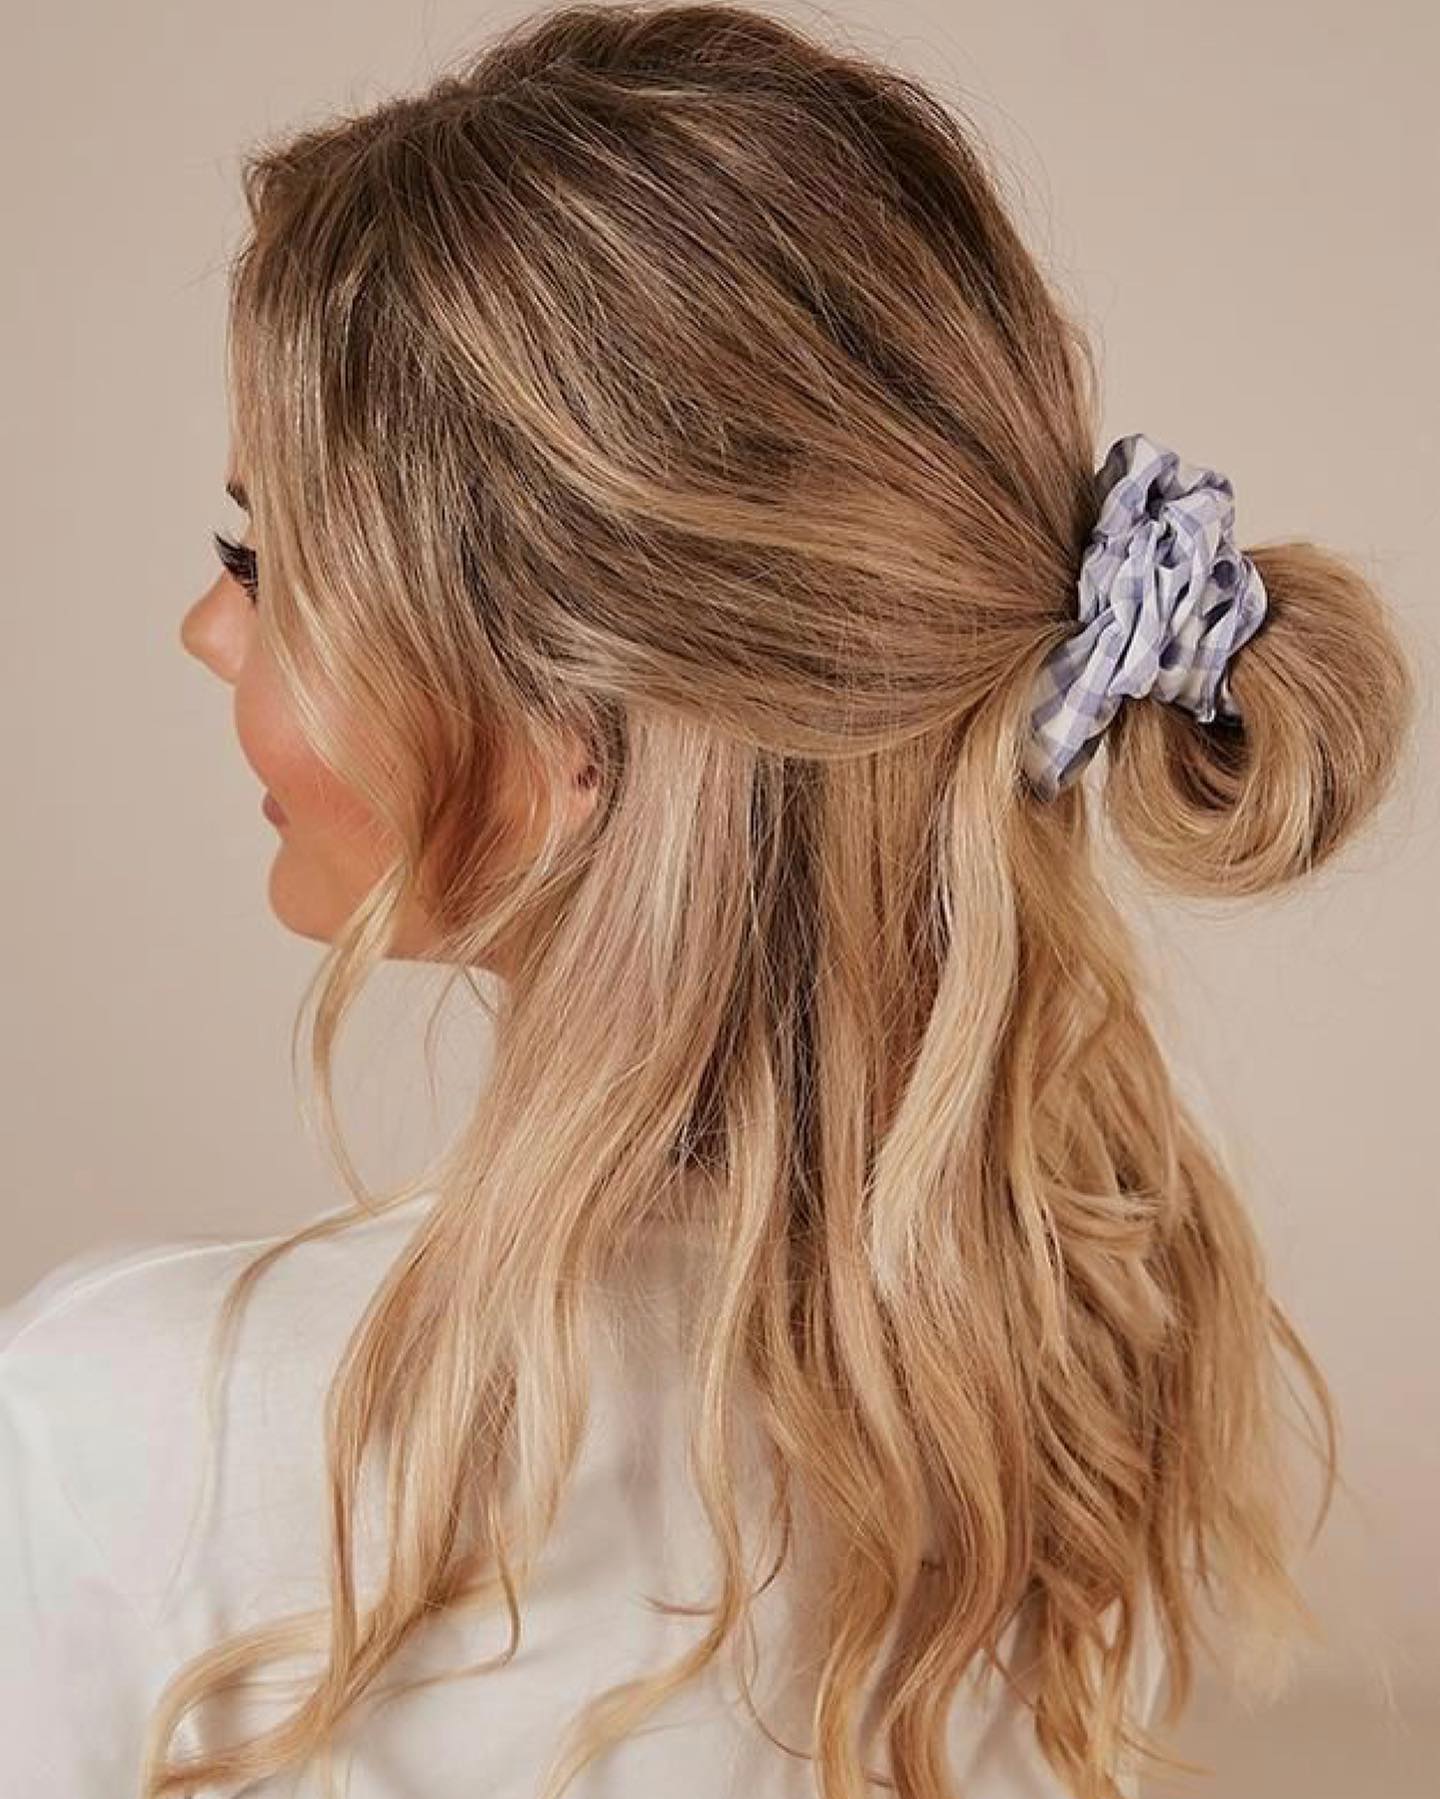 Half up with Scrunchie Hairstyle